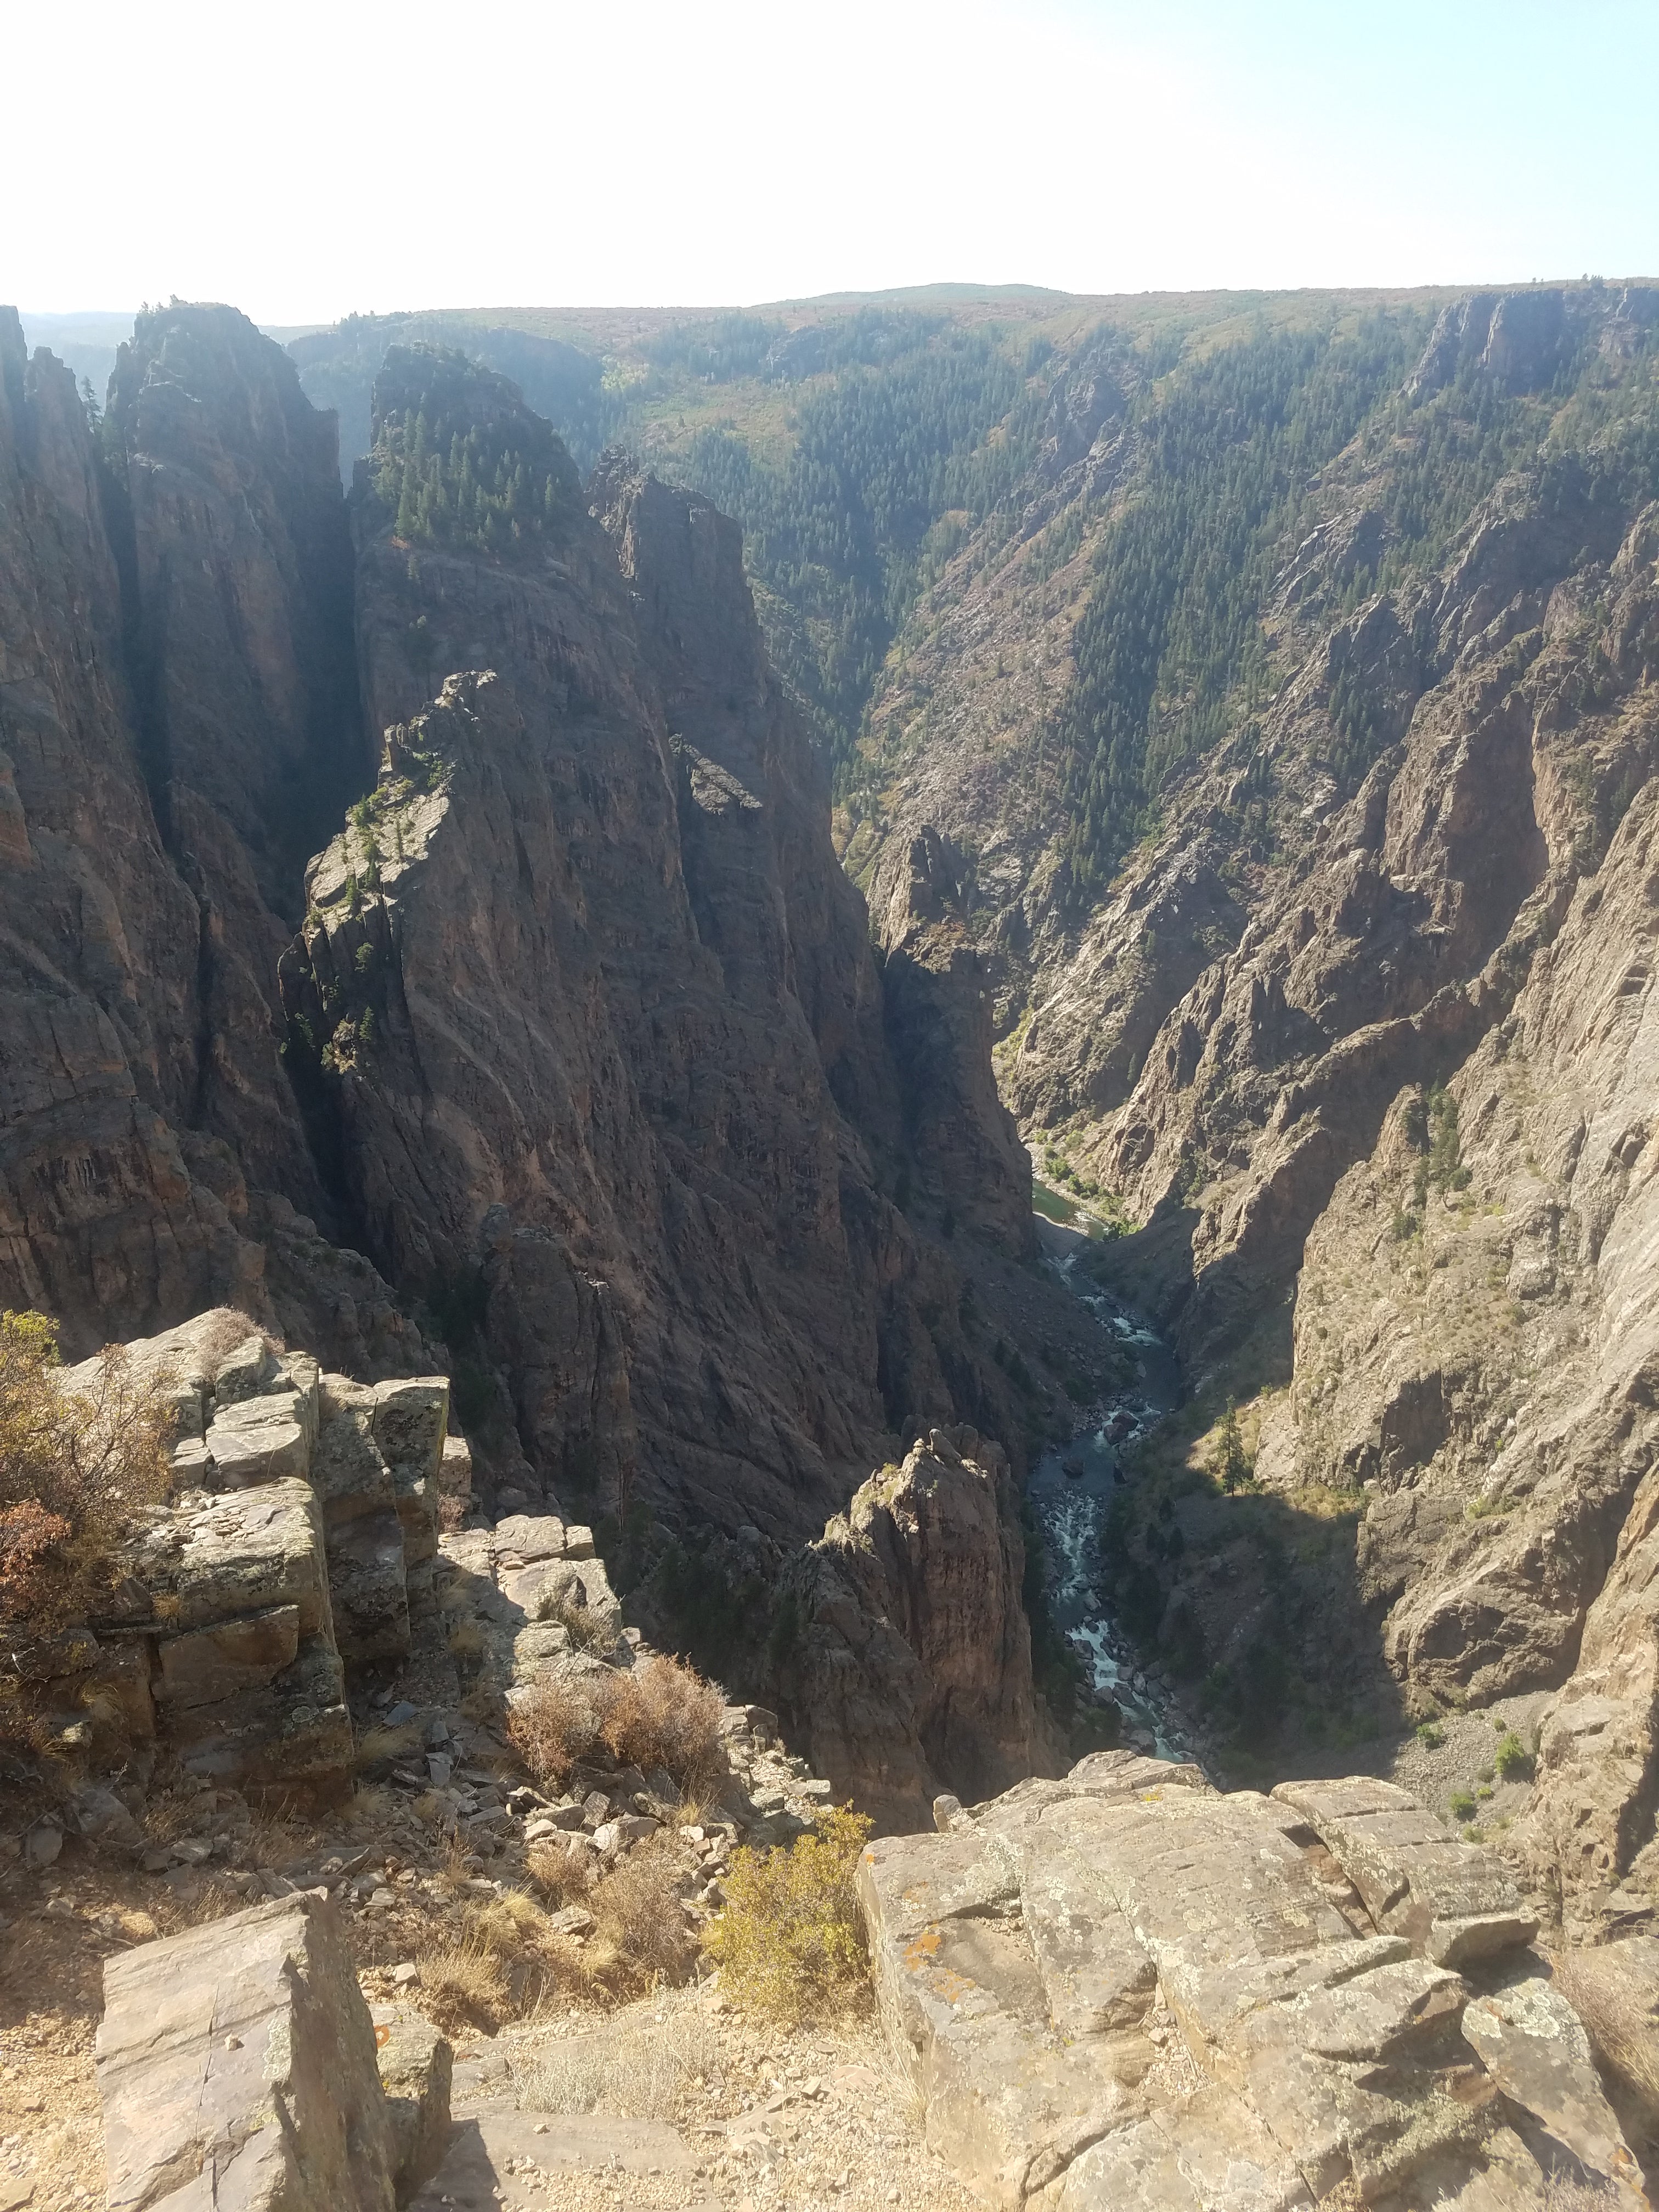 Can't see the canyon from the sites but this is the reason to go to Gunnison. Super close drive from North Rim and so, so amazing. Pictures do not come close to doing it justice.